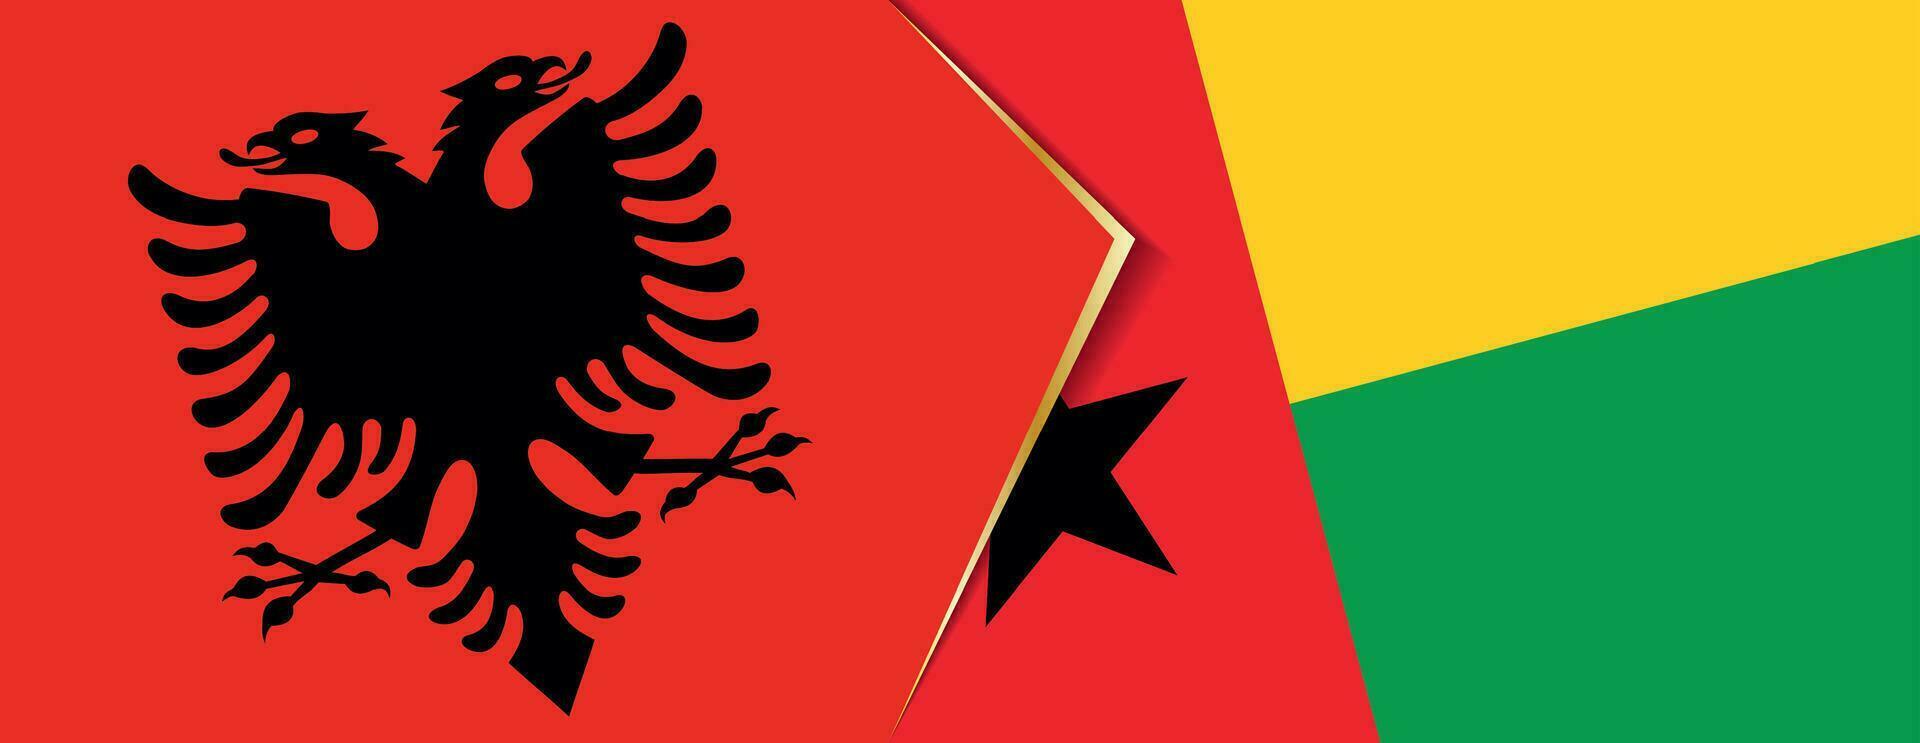 Albania and Guinea-Bissau flags, two vector flags.